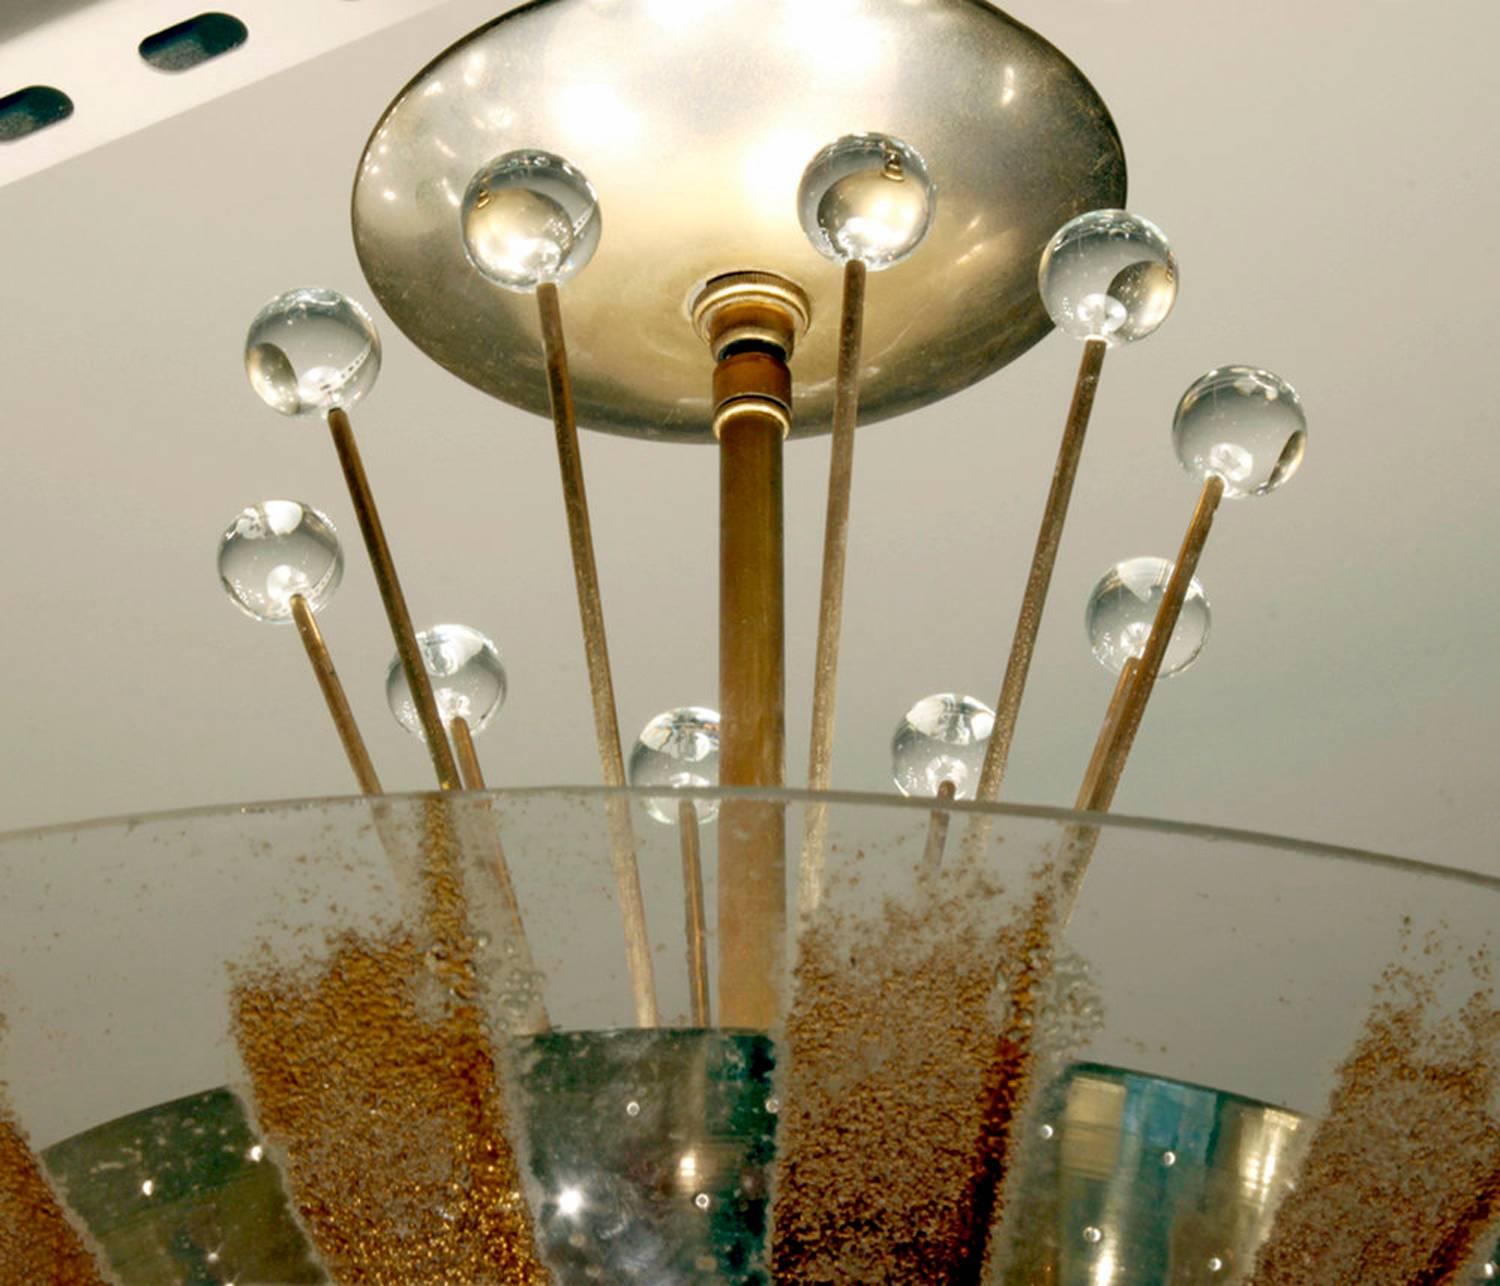 Ceiling mount fixture in brass with perforated shade, glass shade with radiating gold pattern, and crystal spheres by Gerald Thurston for Lightolier, American, 1960s.